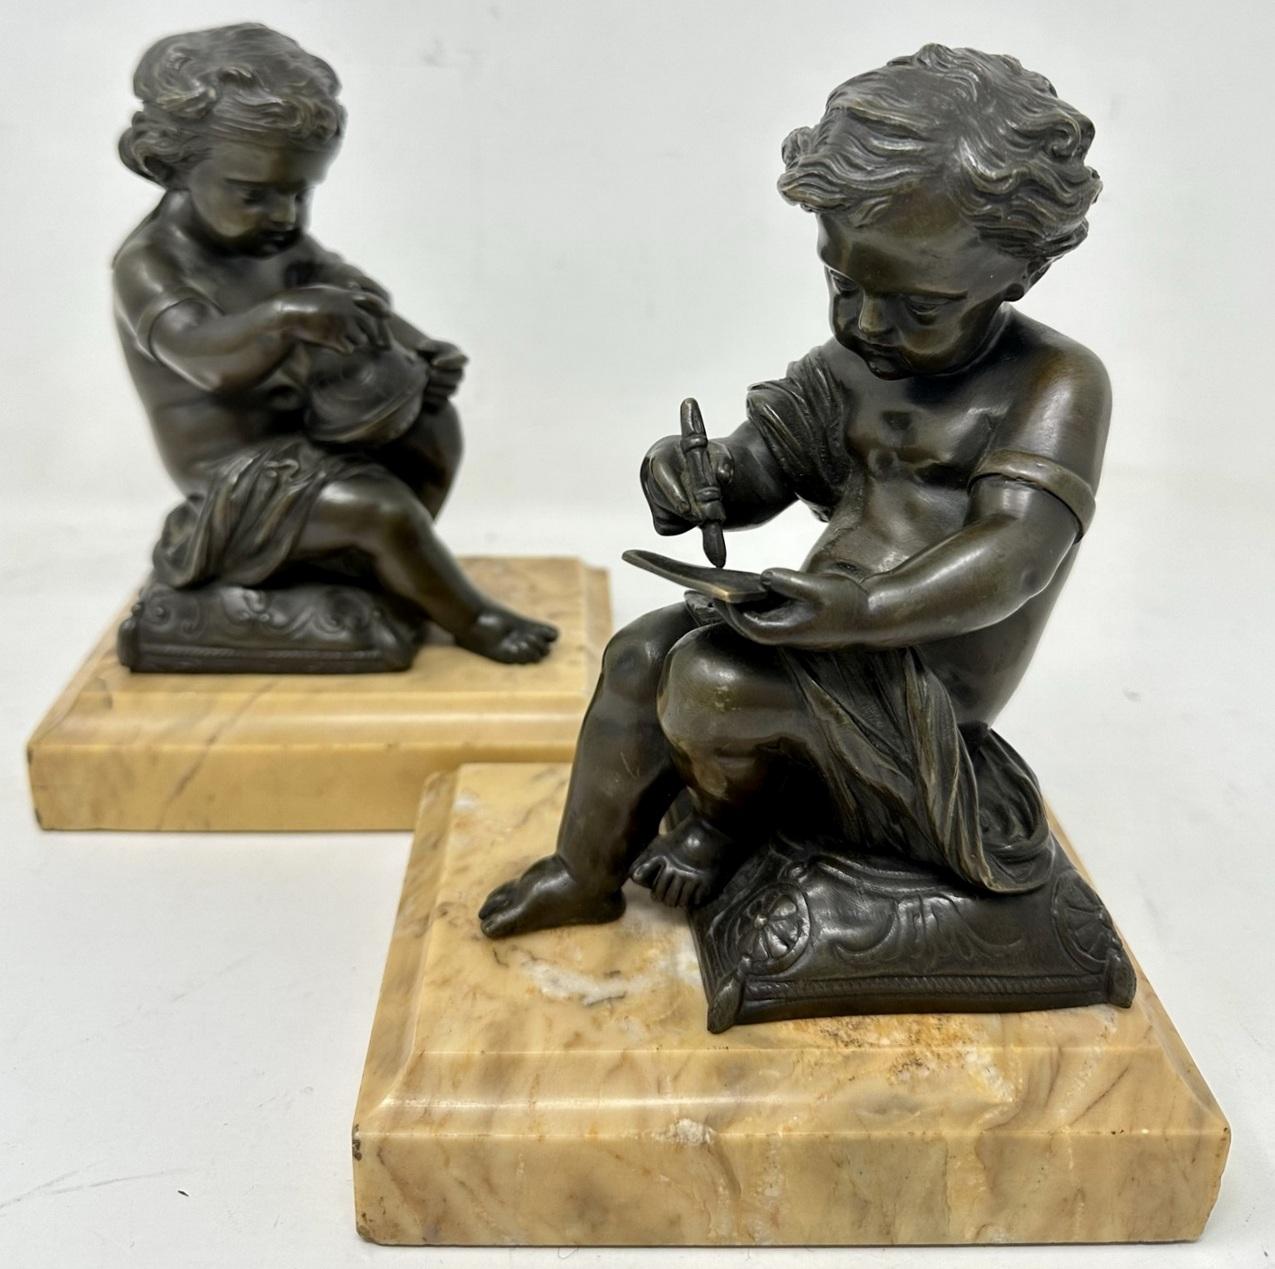 A Rare Antique Pair of Grand Tour Patinated Bronze allegorical seated Putto after Italian Neoclassical Artist Antonio Canova, complete with their original well veined Sienna Marble stepped rectangular bases. Circa second quarter of the Nineteenth